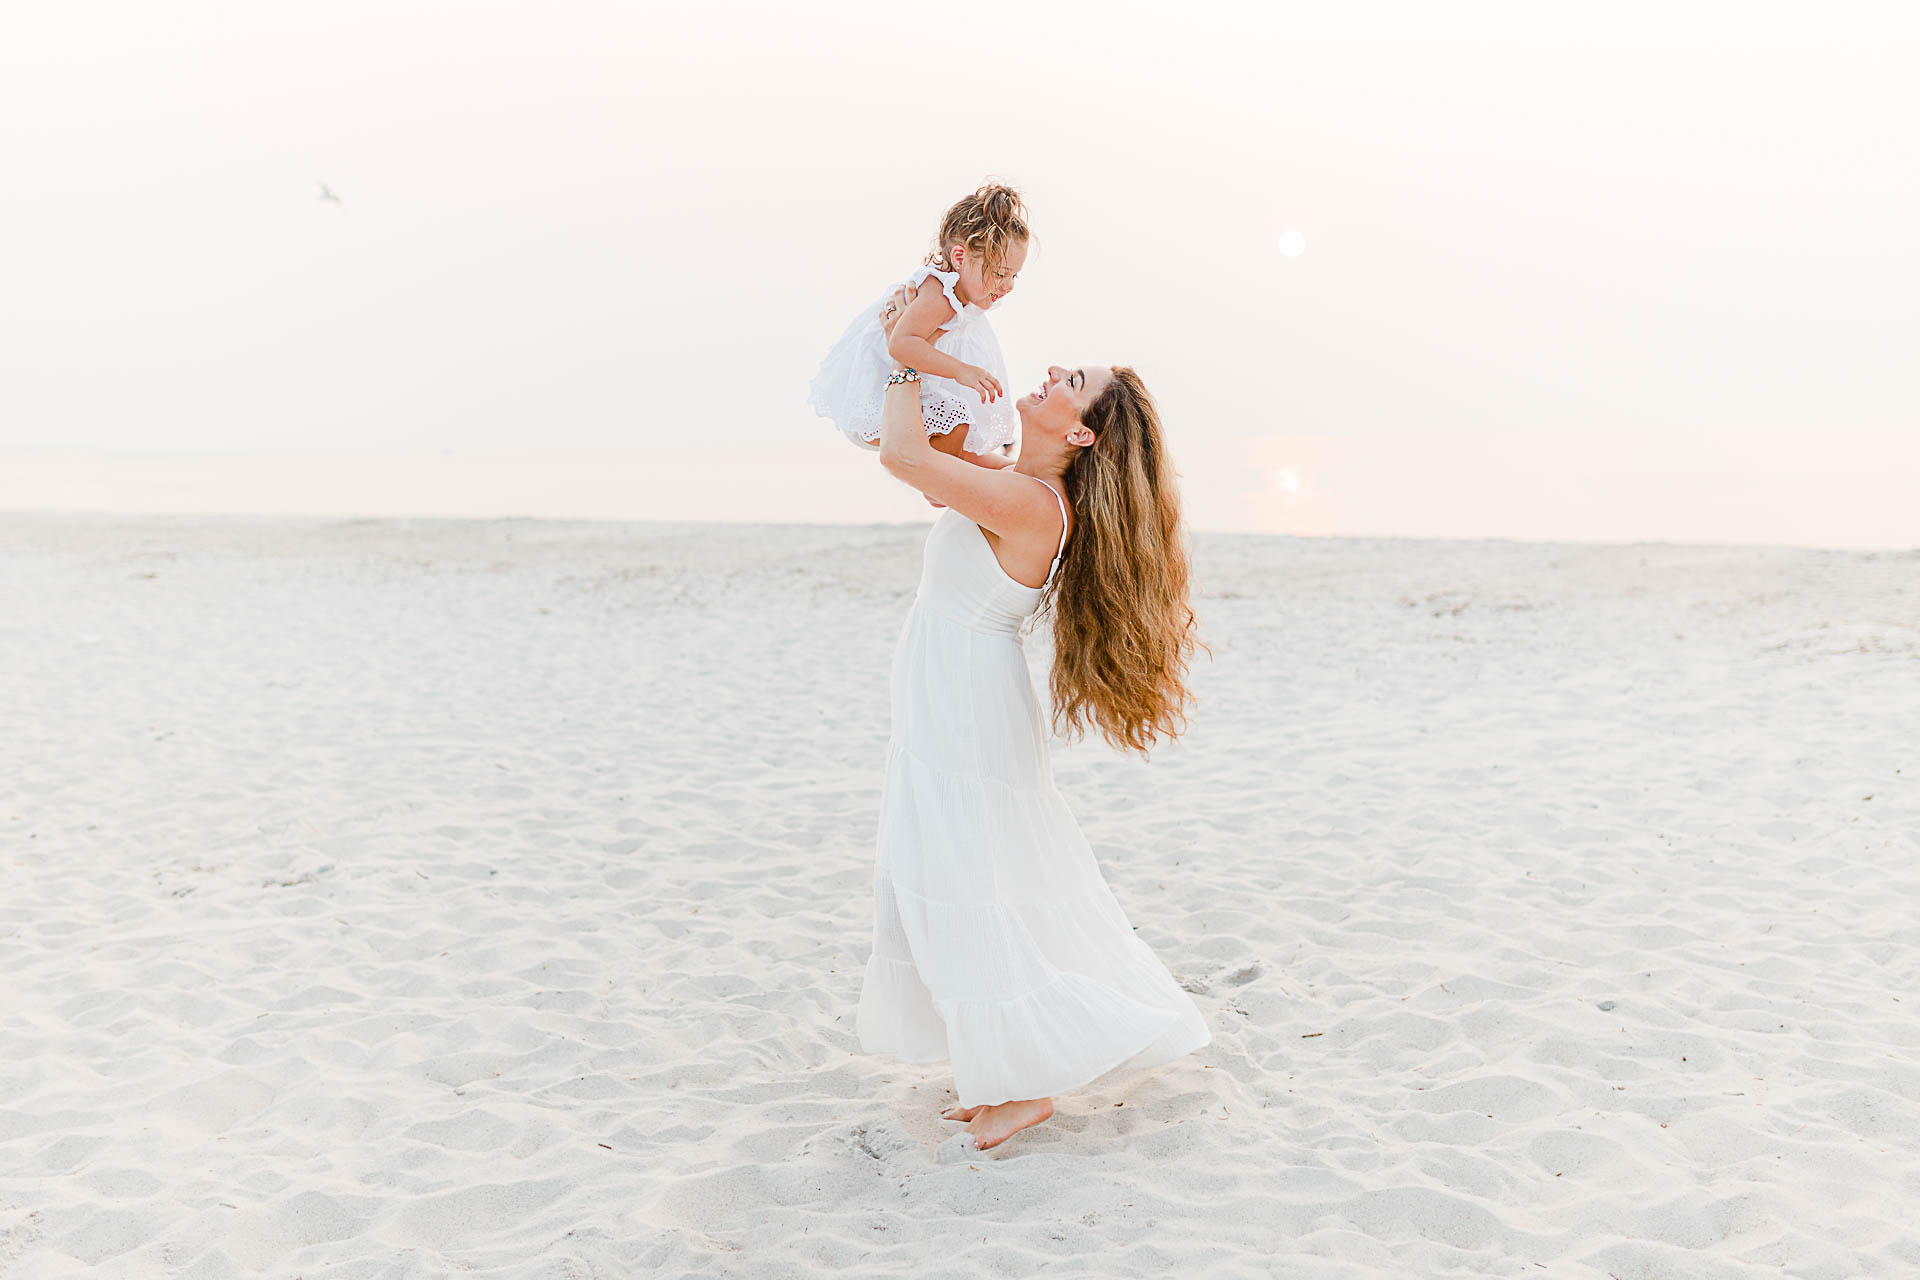 Photo by Cape Cod Family Photographer Christina Runnals | Mom spinning daughter on beach